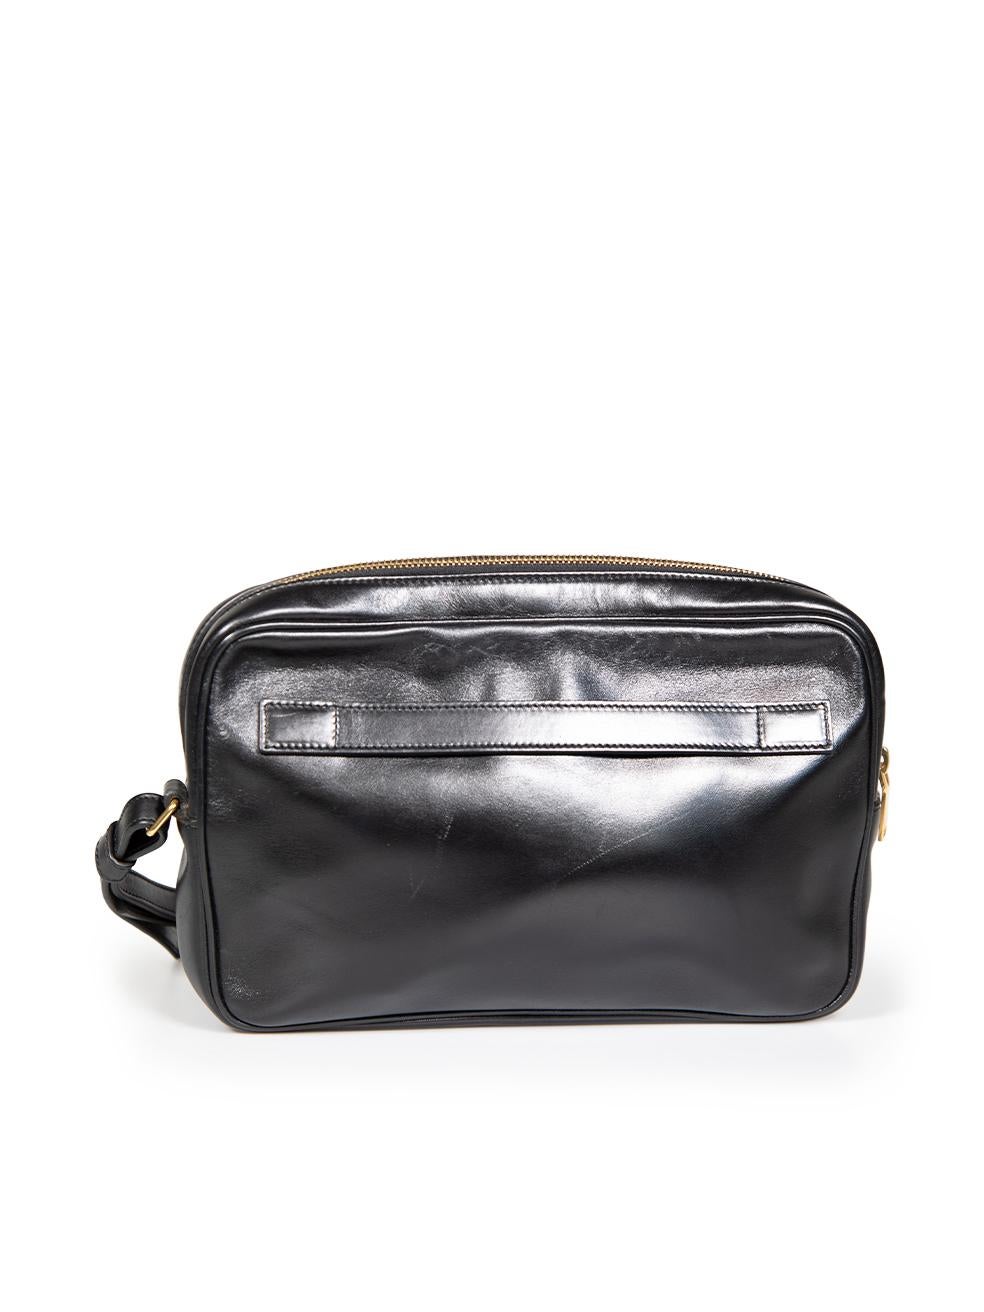 Saint Laurent Black Leather Medium Clutch Bag In Excellent Condition For Sale In London, GB